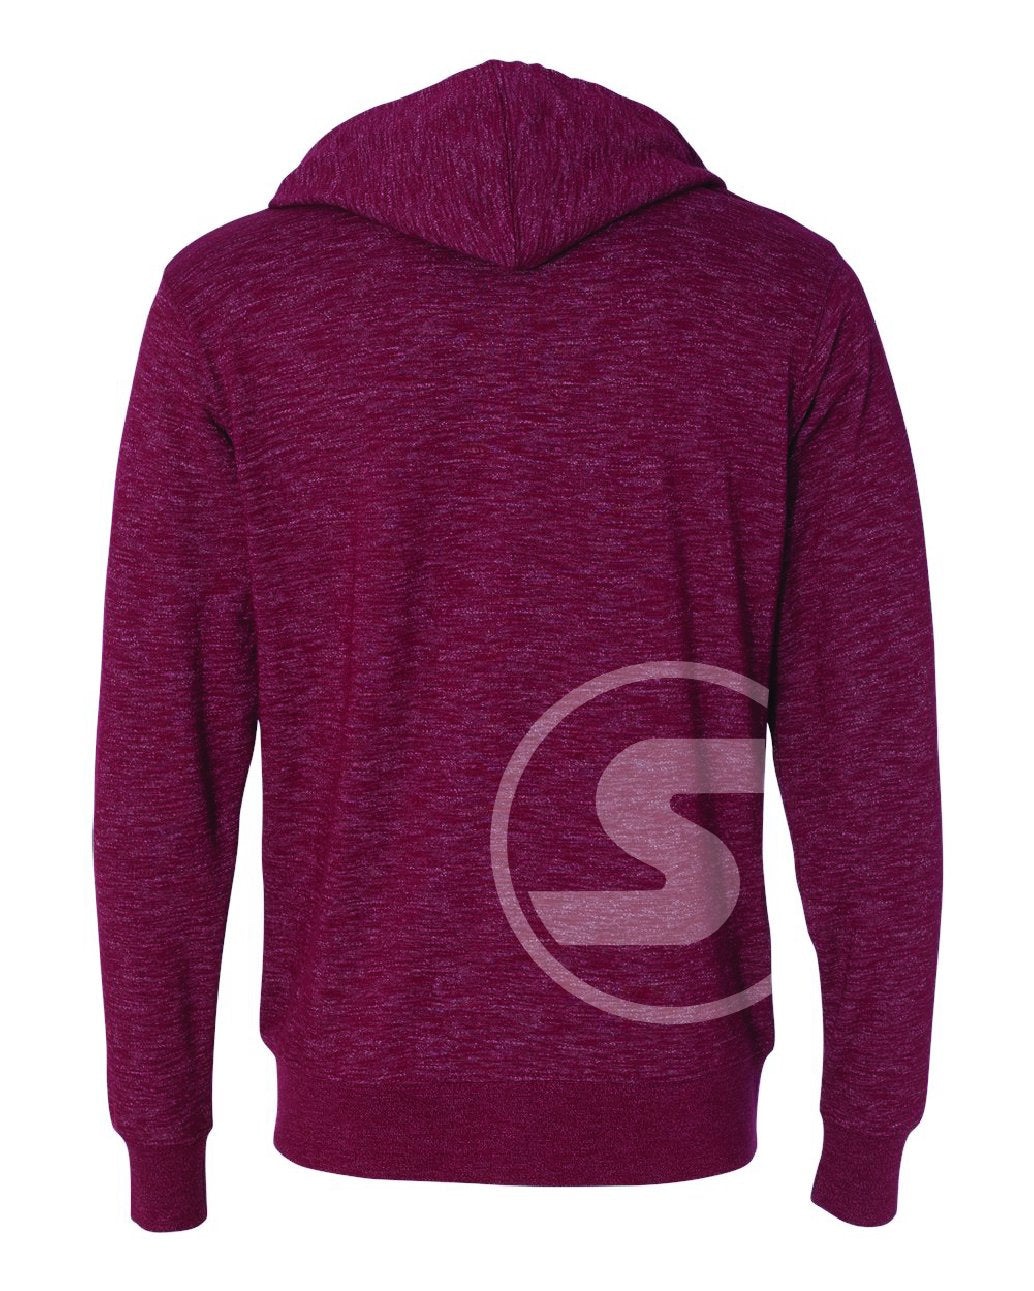 MEN'S SOUTH OF THE BORDER ZIP-UP HOODIE IN ROJO CARDENAL